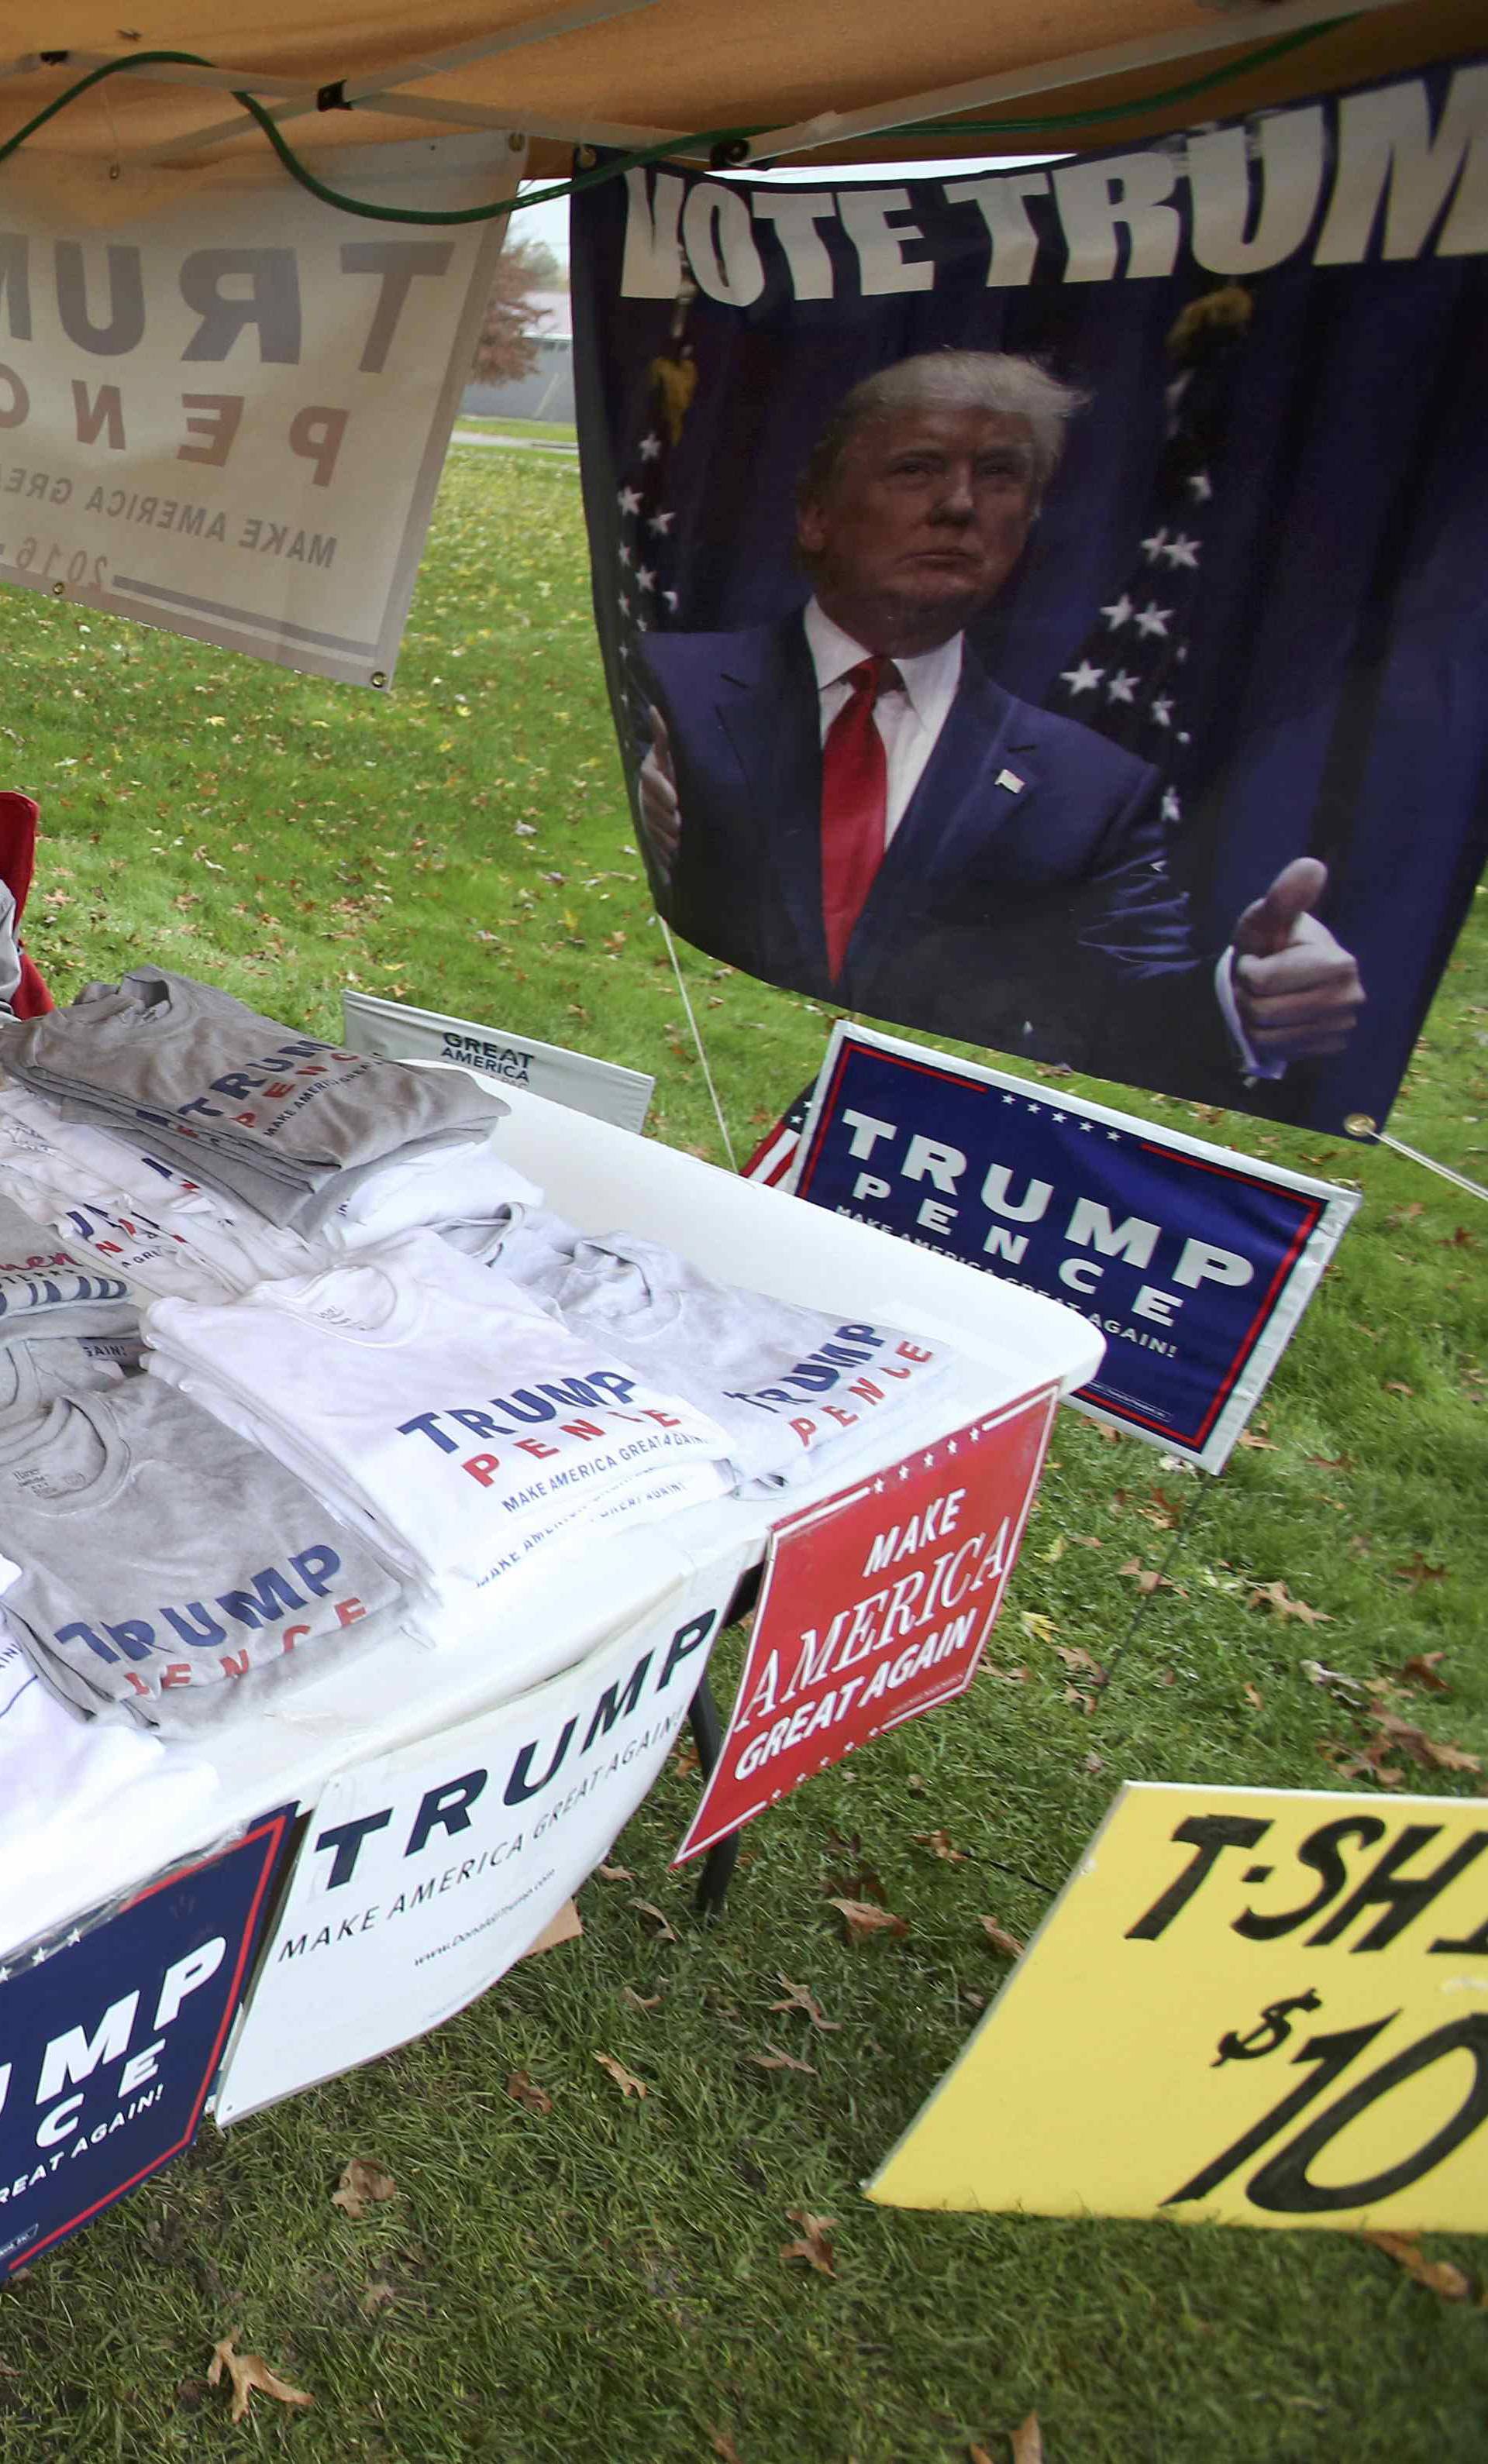 John Pinchak sits under his tent where he is giving away Donald Trump information and selling T-shirts  during the U.S. presidential election in Ohio